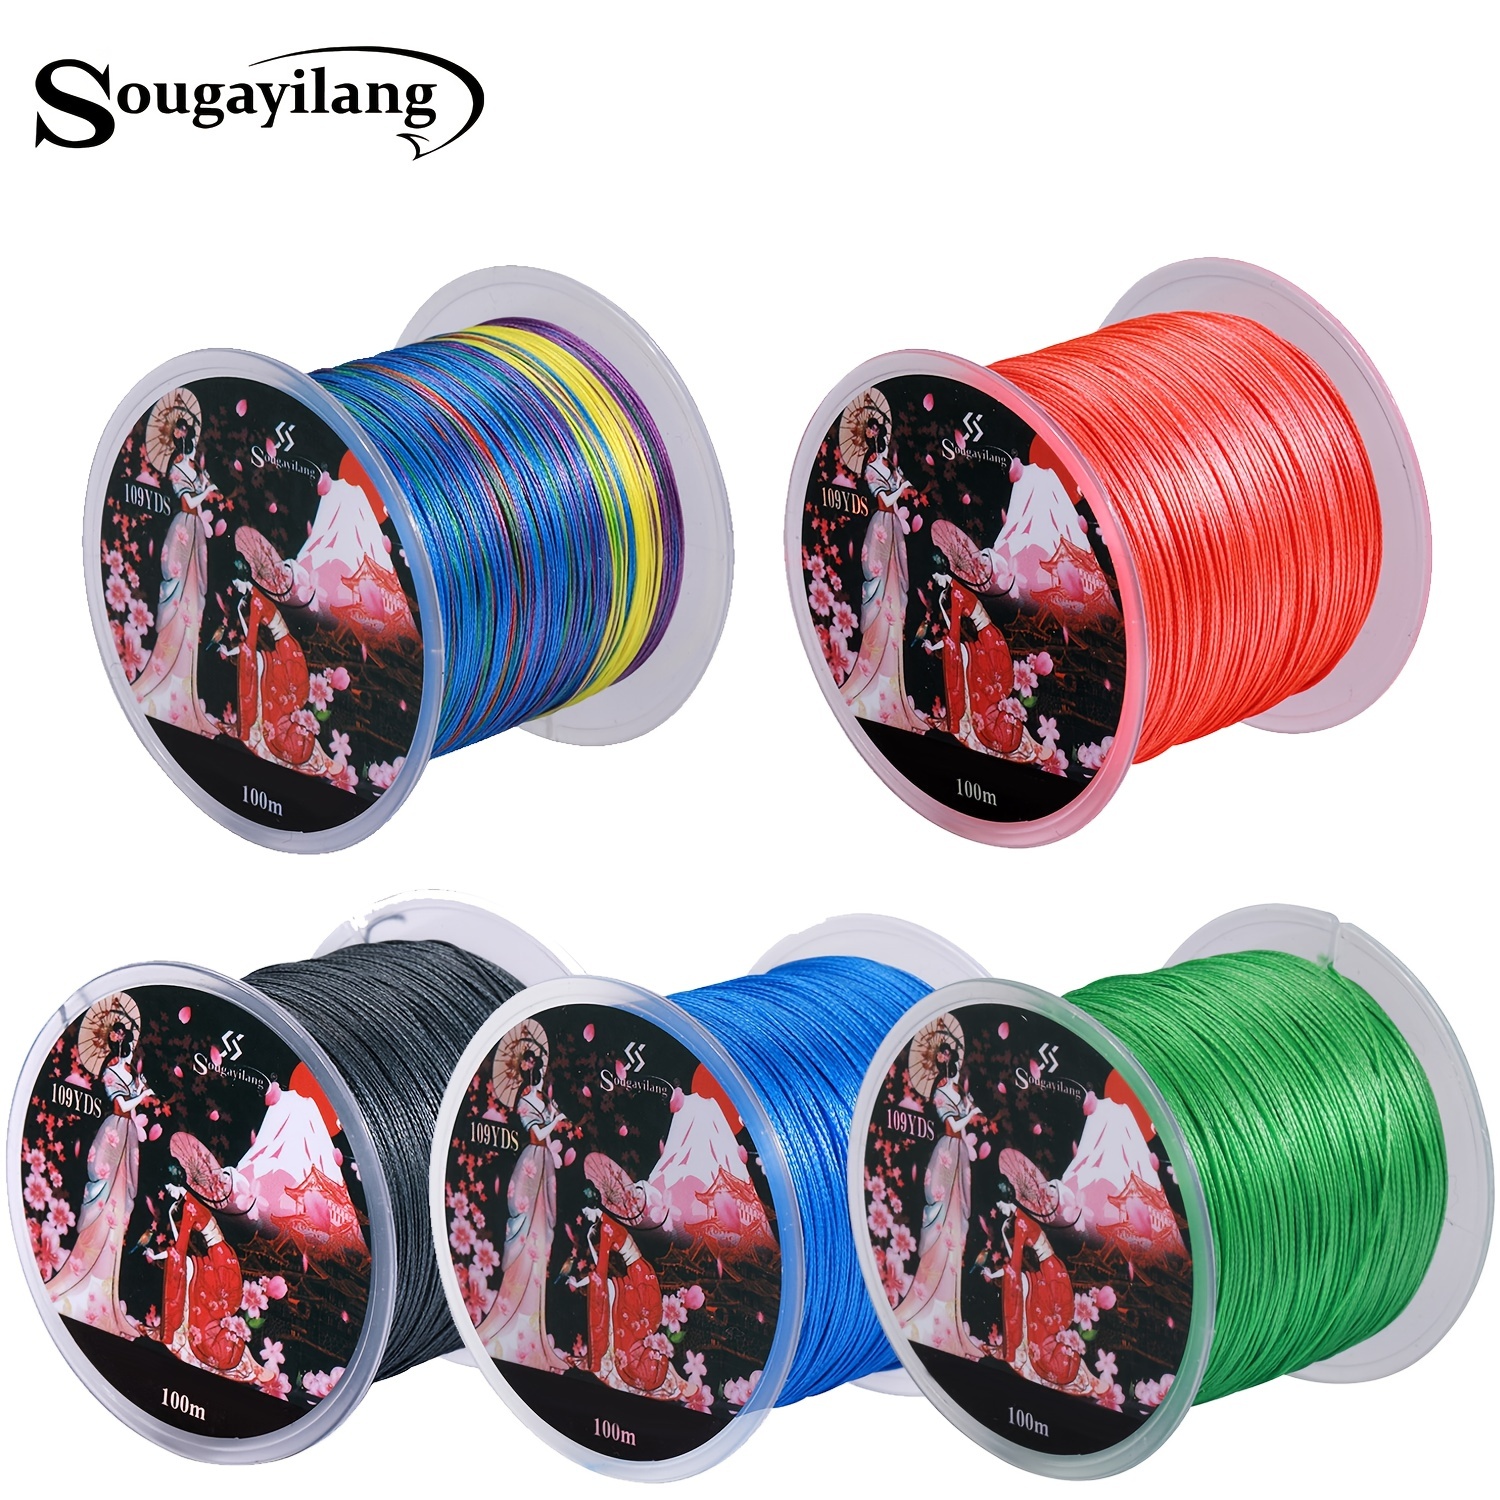 Sougayilang 8 Strand Braided Fishing Line - Strong And Durable Pe